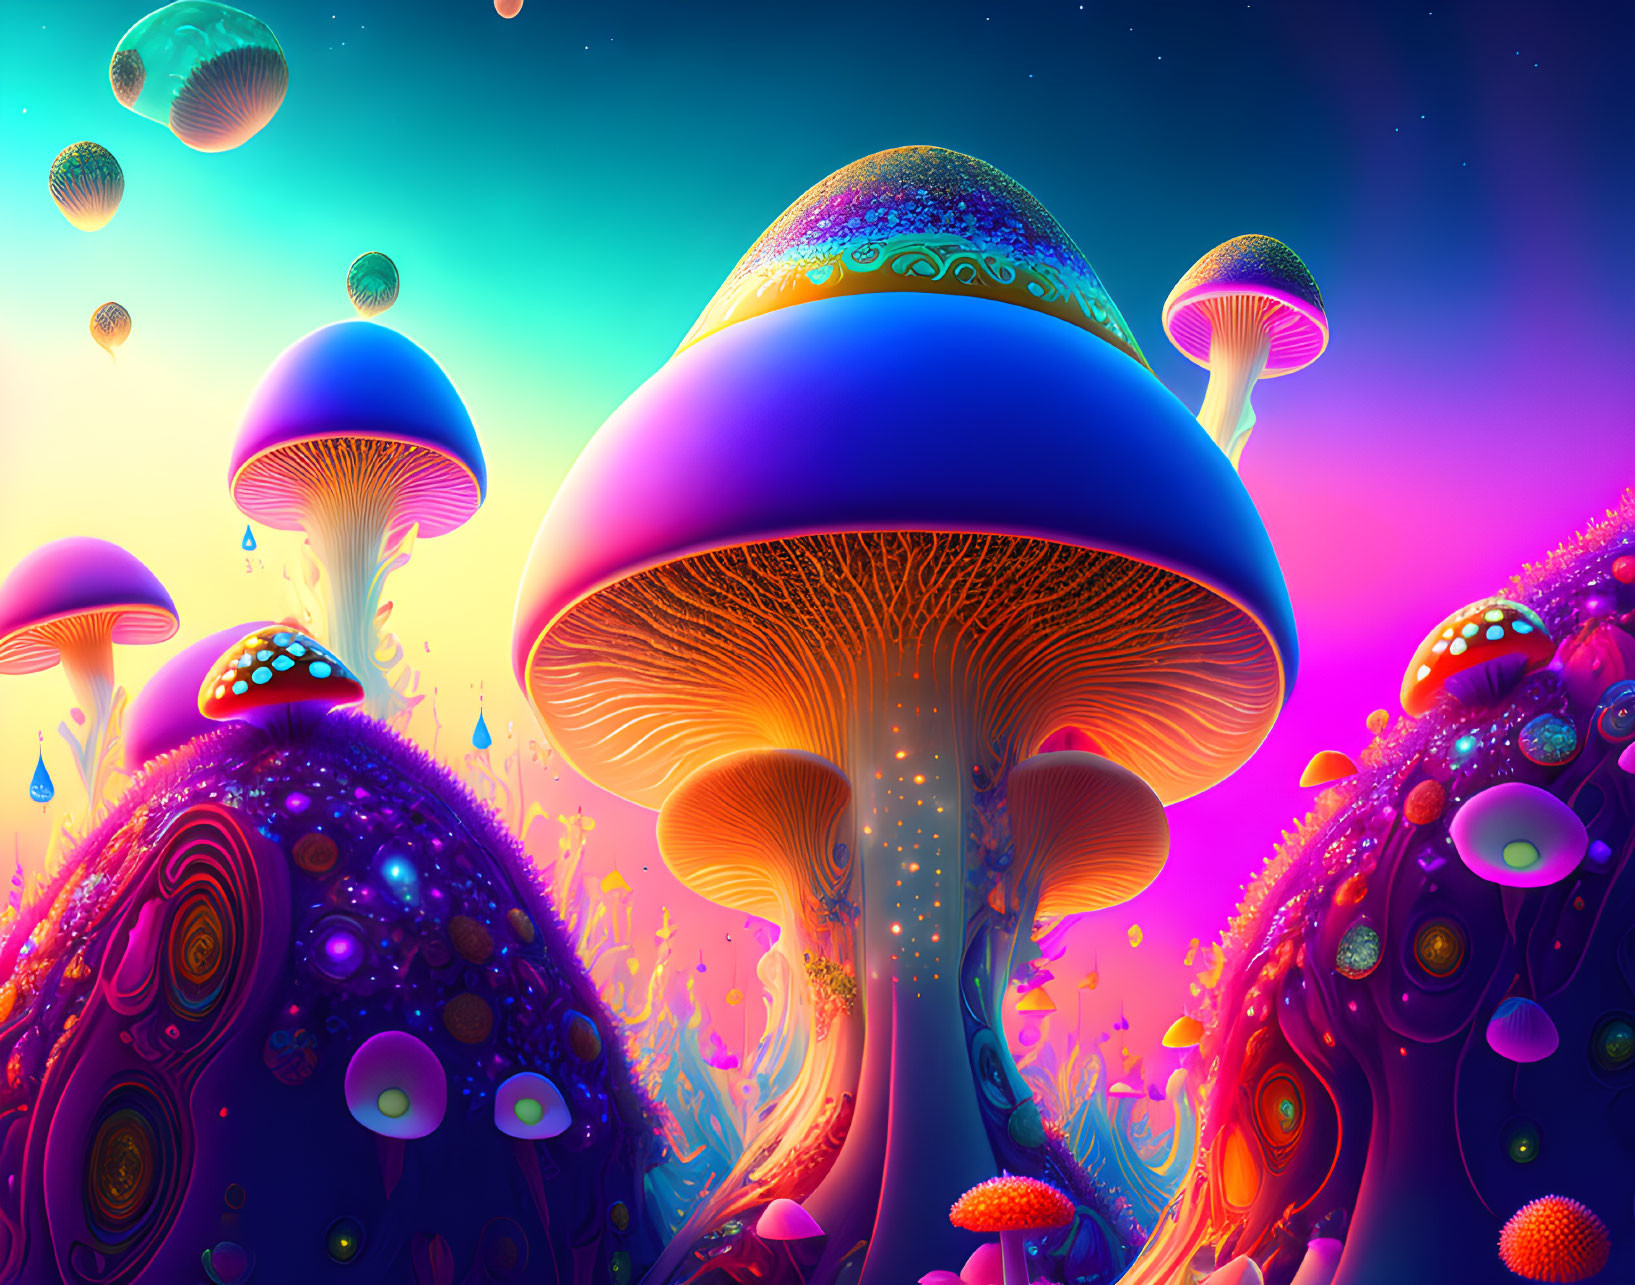 Colorful Psychedelic Mushroom Artwork with Gradient Sky and Orbs